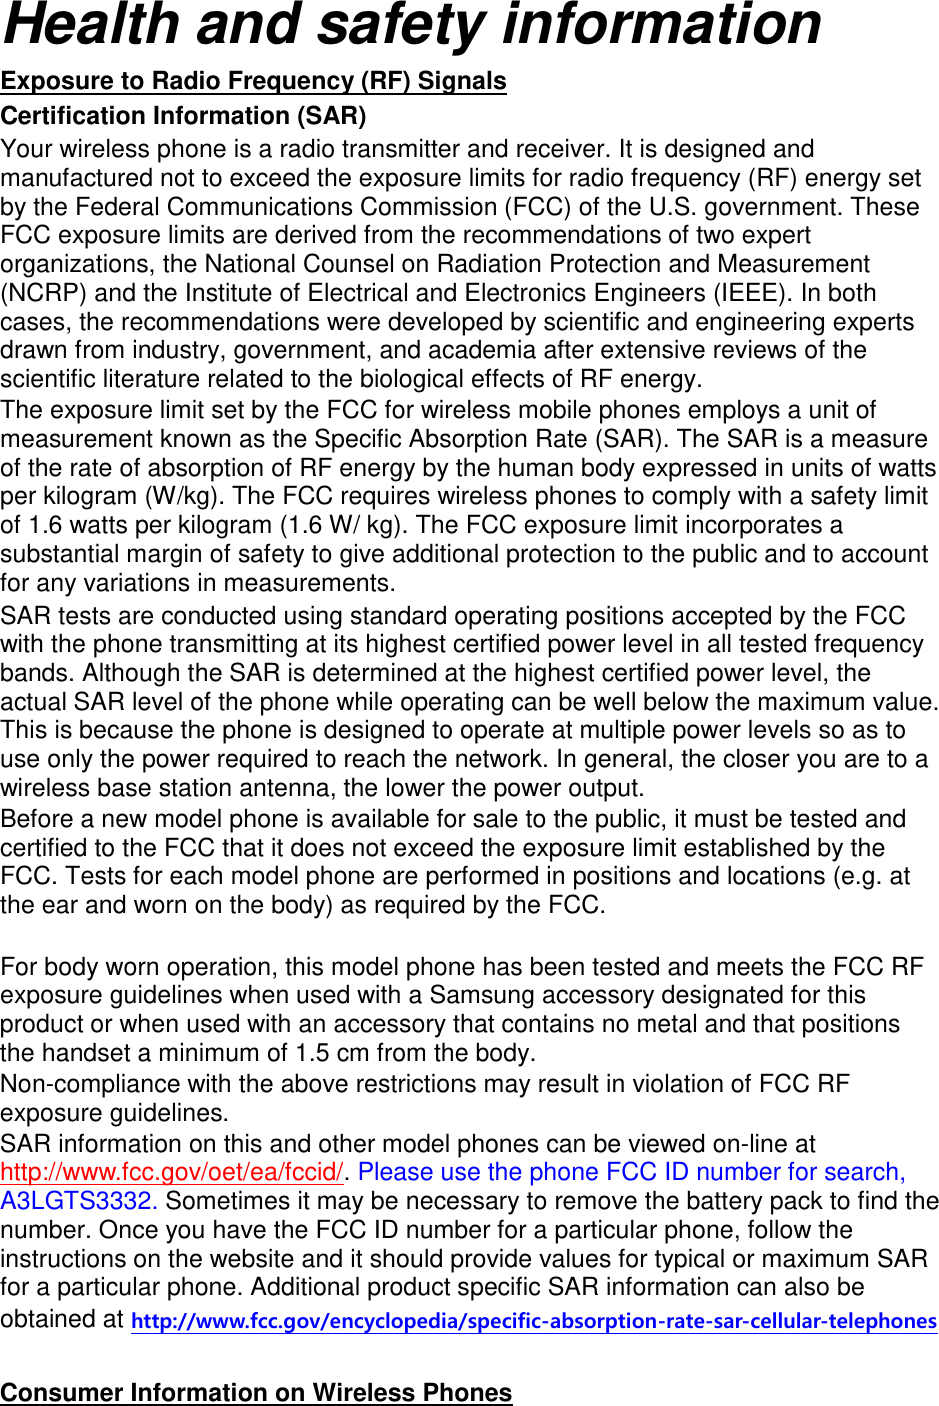 Health and safety information Exposure to Radio Frequency (RF) Signals Certification Information (SAR) Your wireless phone is a radio transmitter and receiver. It is designed and manufactured not to exceed the exposure limits for radio frequency (RF) energy set by the Federal Communications Commission (FCC) of the U.S. government. These FCC exposure limits are derived from the recommendations of two expert organizations, the National Counsel on Radiation Protection and Measurement (NCRP) and the Institute of Electrical and Electronics Engineers (IEEE). In both cases, the recommendations were developed by scientific and engineering experts drawn from industry, government, and academia after extensive reviews of the scientific literature related to the biological effects of RF energy. The exposure limit set by the FCC for wireless mobile phones employs a unit of measurement known as the Specific Absorption Rate (SAR). The SAR is a measure of the rate of absorption of RF energy by the human body expressed in units of watts per kilogram (W/kg). The FCC requires wireless phones to comply with a safety limit of 1.6 watts per kilogram (1.6 W/ kg). The FCC exposure limit incorporates a substantial margin of safety to give additional protection to the public and to account for any variations in measurements. SAR tests are conducted using standard operating positions accepted by the FCC with the phone transmitting at its highest certified power level in all tested frequency bands. Although the SAR is determined at the highest certified power level, the actual SAR level of the phone while operating can be well below the maximum value. This is because the phone is designed to operate at multiple power levels so as to use only the power required to reach the network. In general, the closer you are to a wireless base station antenna, the lower the power output. Before a new model phone is available for sale to the public, it must be tested and certified to the FCC that it does not exceed the exposure limit established by the FCC. Tests for each model phone are performed in positions and locations (e.g. at the ear and worn on the body) as required by the FCC.      For body worn operation, this model phone has been tested and meets the FCC RF exposure guidelines when used with a Samsung accessory designated for this product or when used with an accessory that contains no metal and that positions the handset a minimum of 1.5 cm from the body.   Non-compliance with the above restrictions may result in violation of FCC RF exposure guidelines. SAR information on this and other model phones can be viewed on-line at http://www.fcc.gov/oet/ea/fccid/. Please use the phone FCC ID number for search, A3LGTS3332. Sometimes it may be necessary to remove the battery pack to find the number. Once you have the FCC ID number for a particular phone, follow the instructions on the website and it should provide values for typical or maximum SAR for a particular phone. Additional product specific SAR information can also be obtained at http://www.fcc.gov/encyclopedia/specific-absorption-rate-sar-cellular-telephones  Consumer Information on Wireless Phones 